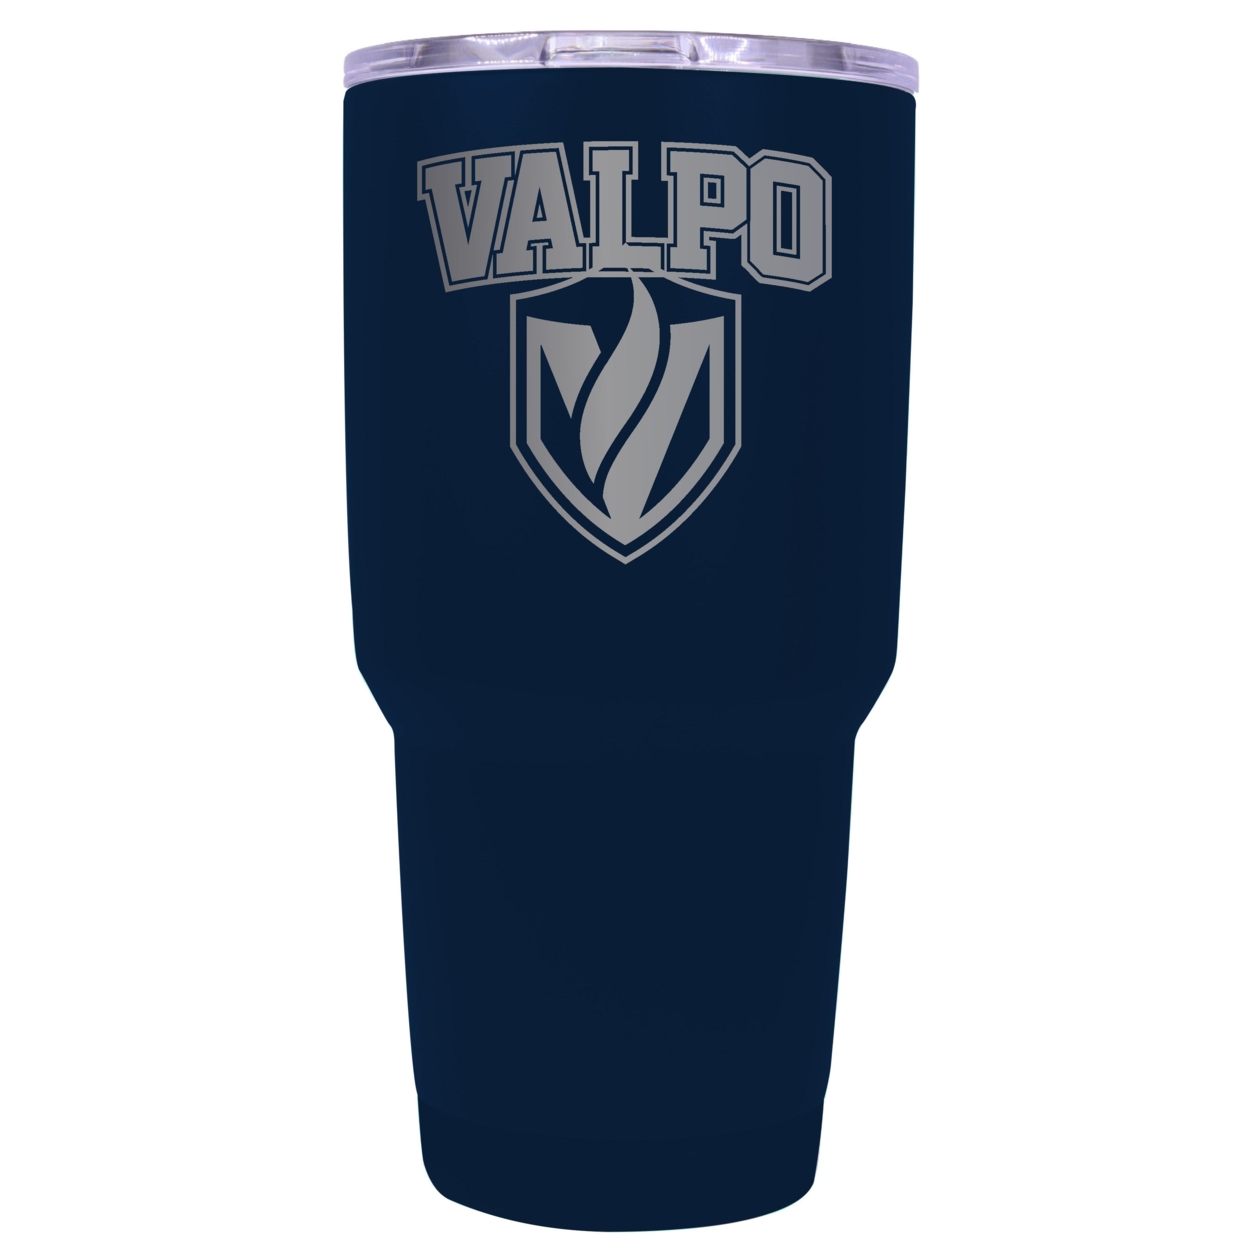 Valparaiso University 24 Oz Laser Engraved Stainless Steel Insulated Tumbler - Choose Your Color. - Seafoam